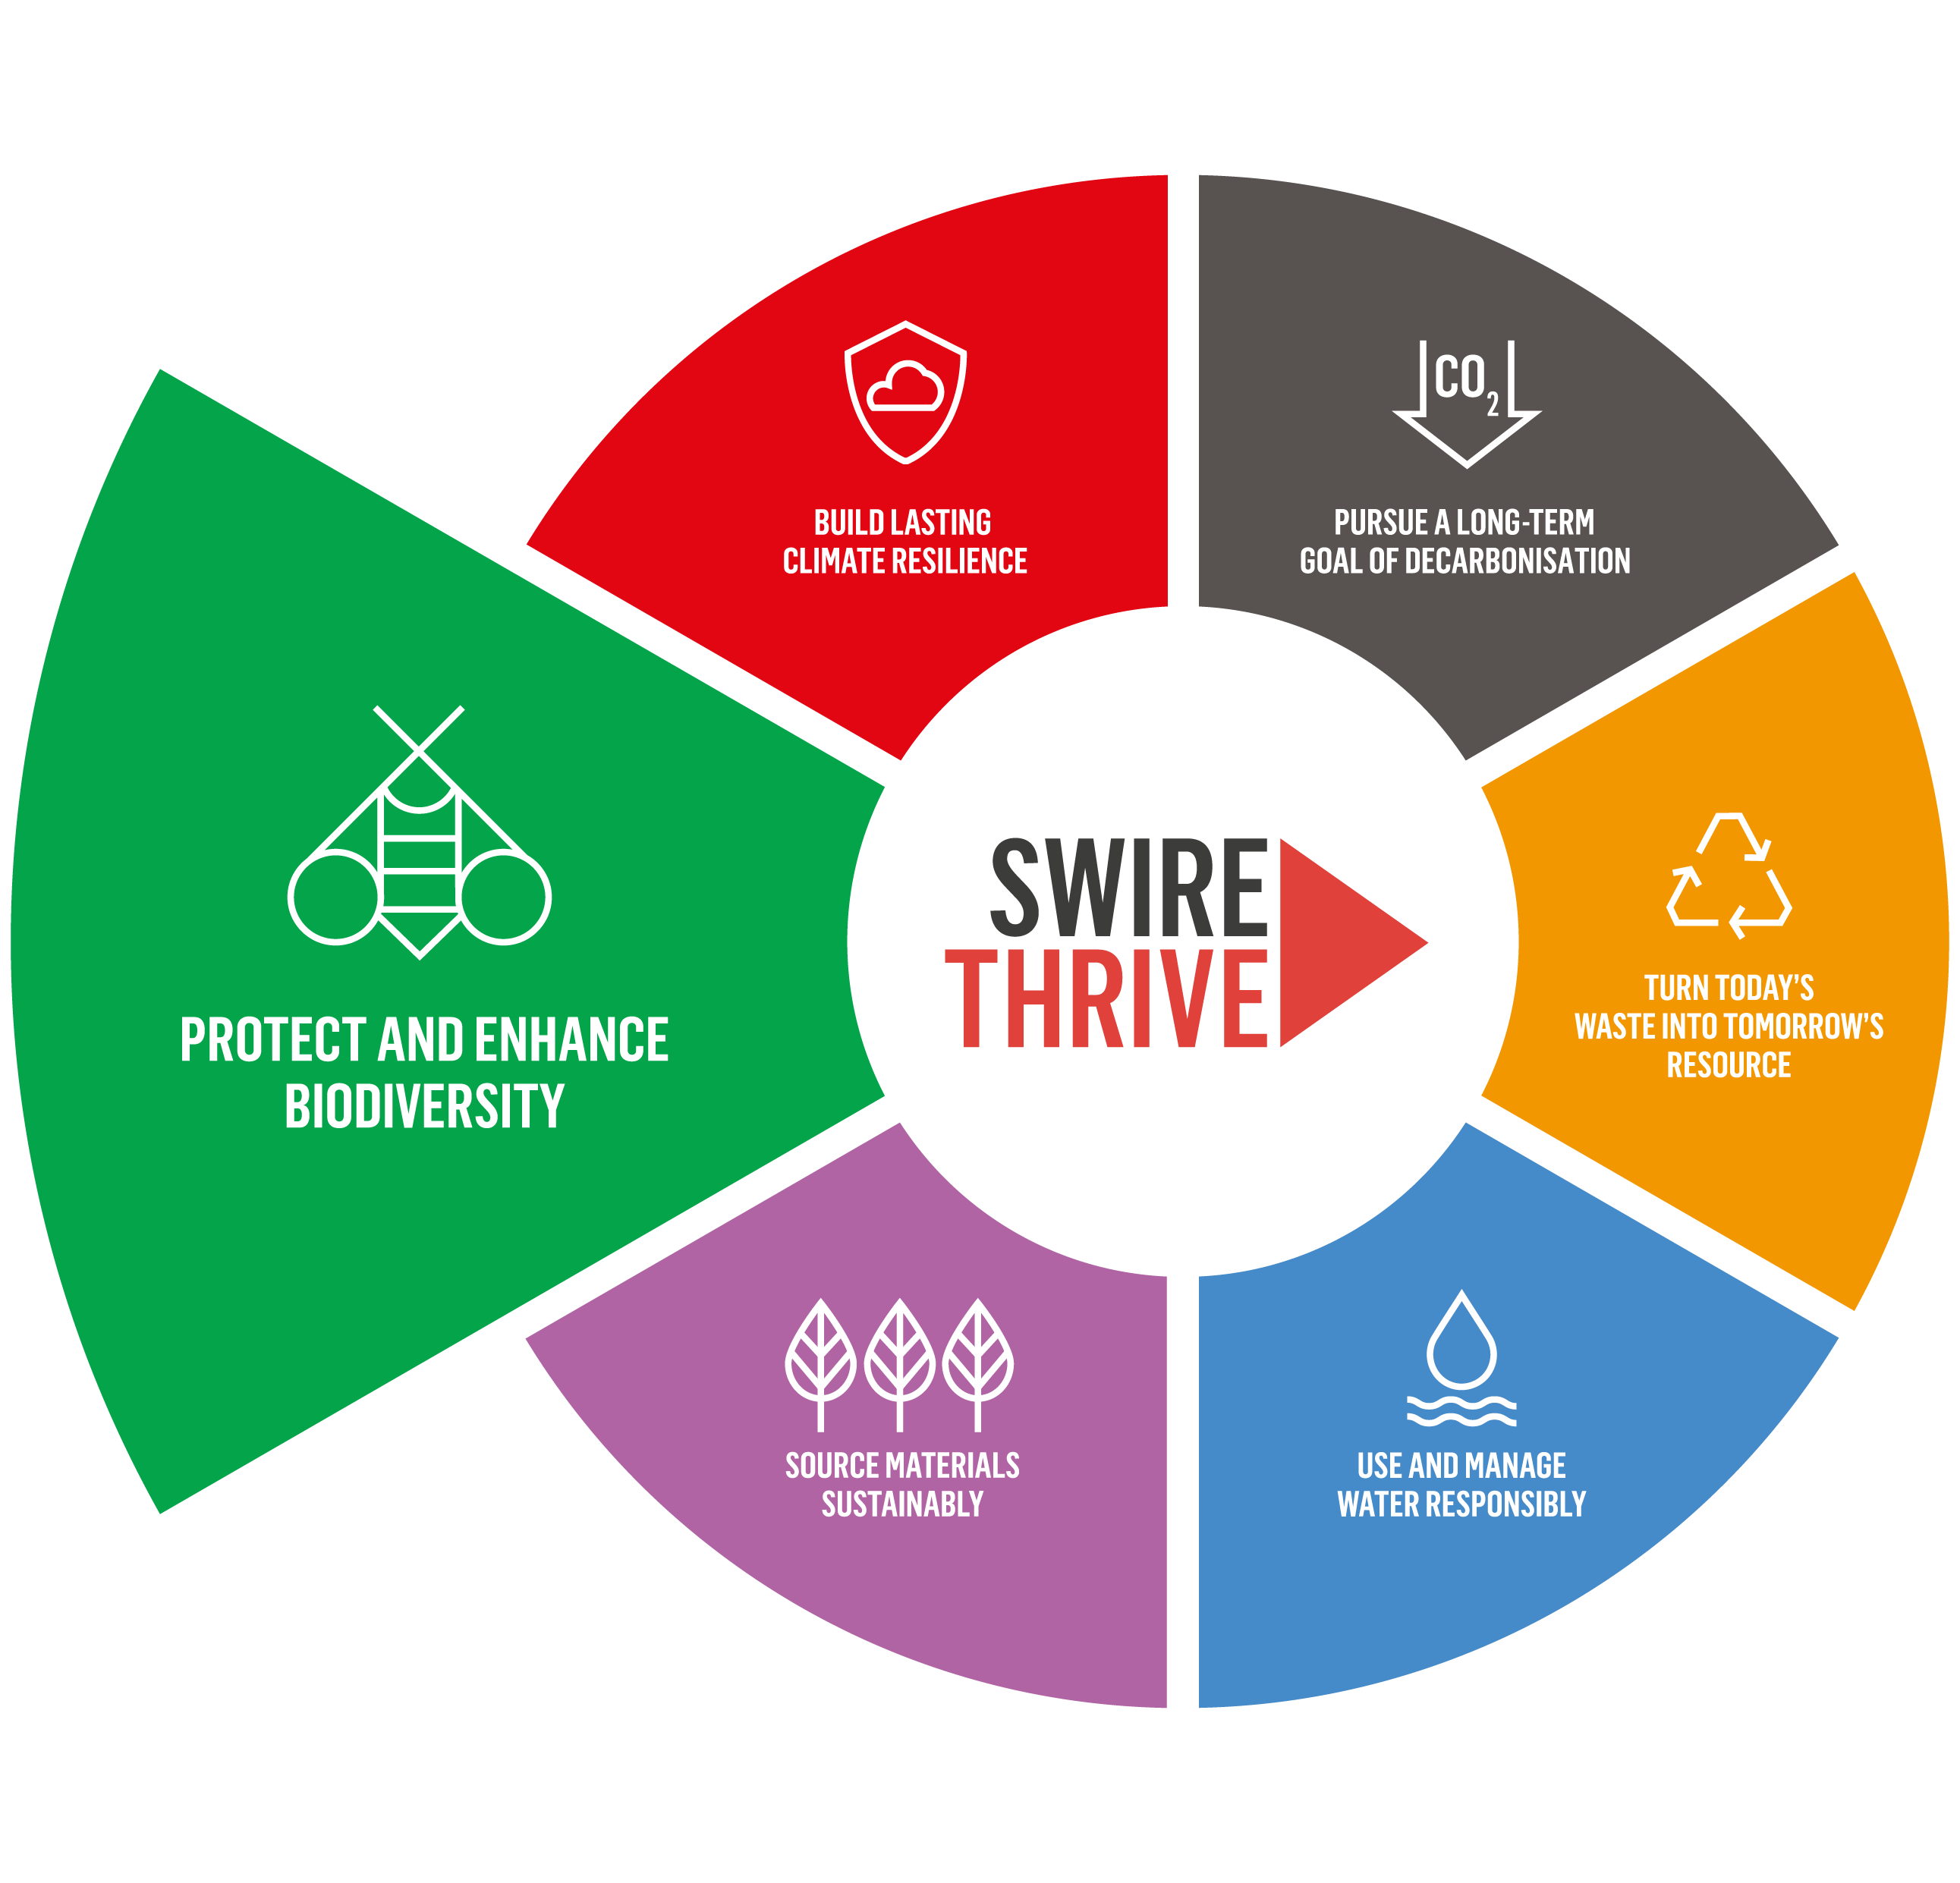 SWIRE THRIVE - Protect and enhance biodiversity